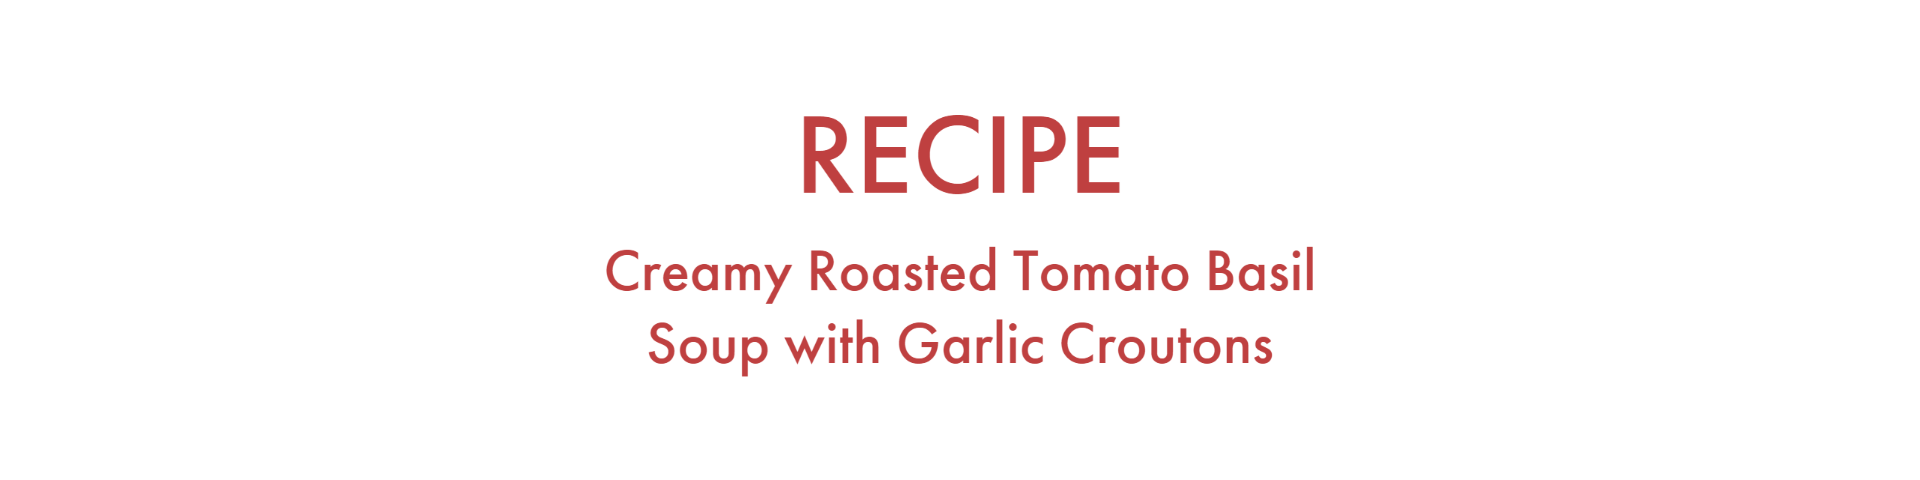 Fraiche Food, Full Hearts Cookbook - Creamy Roasted Tomato Basil Soup with Garlic Croutons